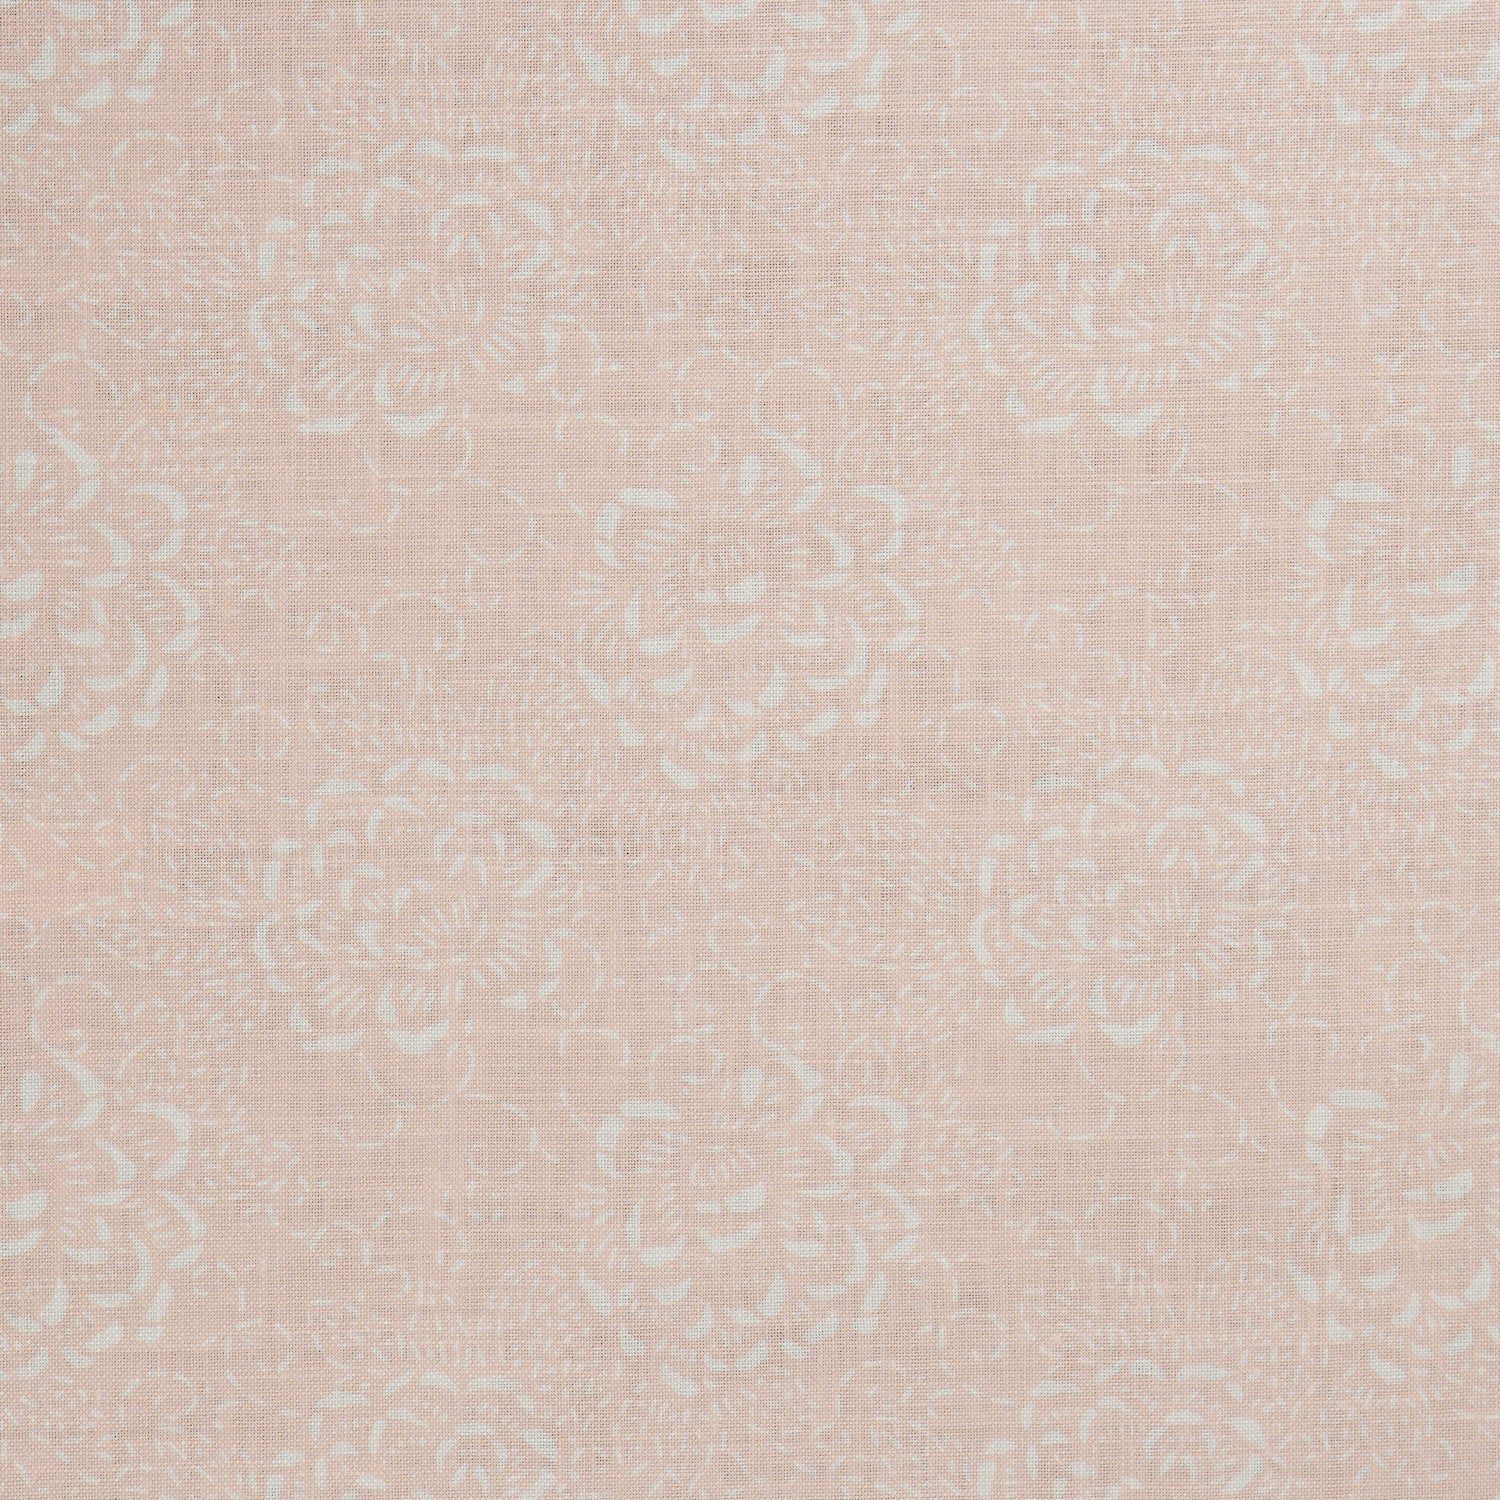 Detail of a printed linen fabric in a repeating camellia pattern in white on a light pink field.